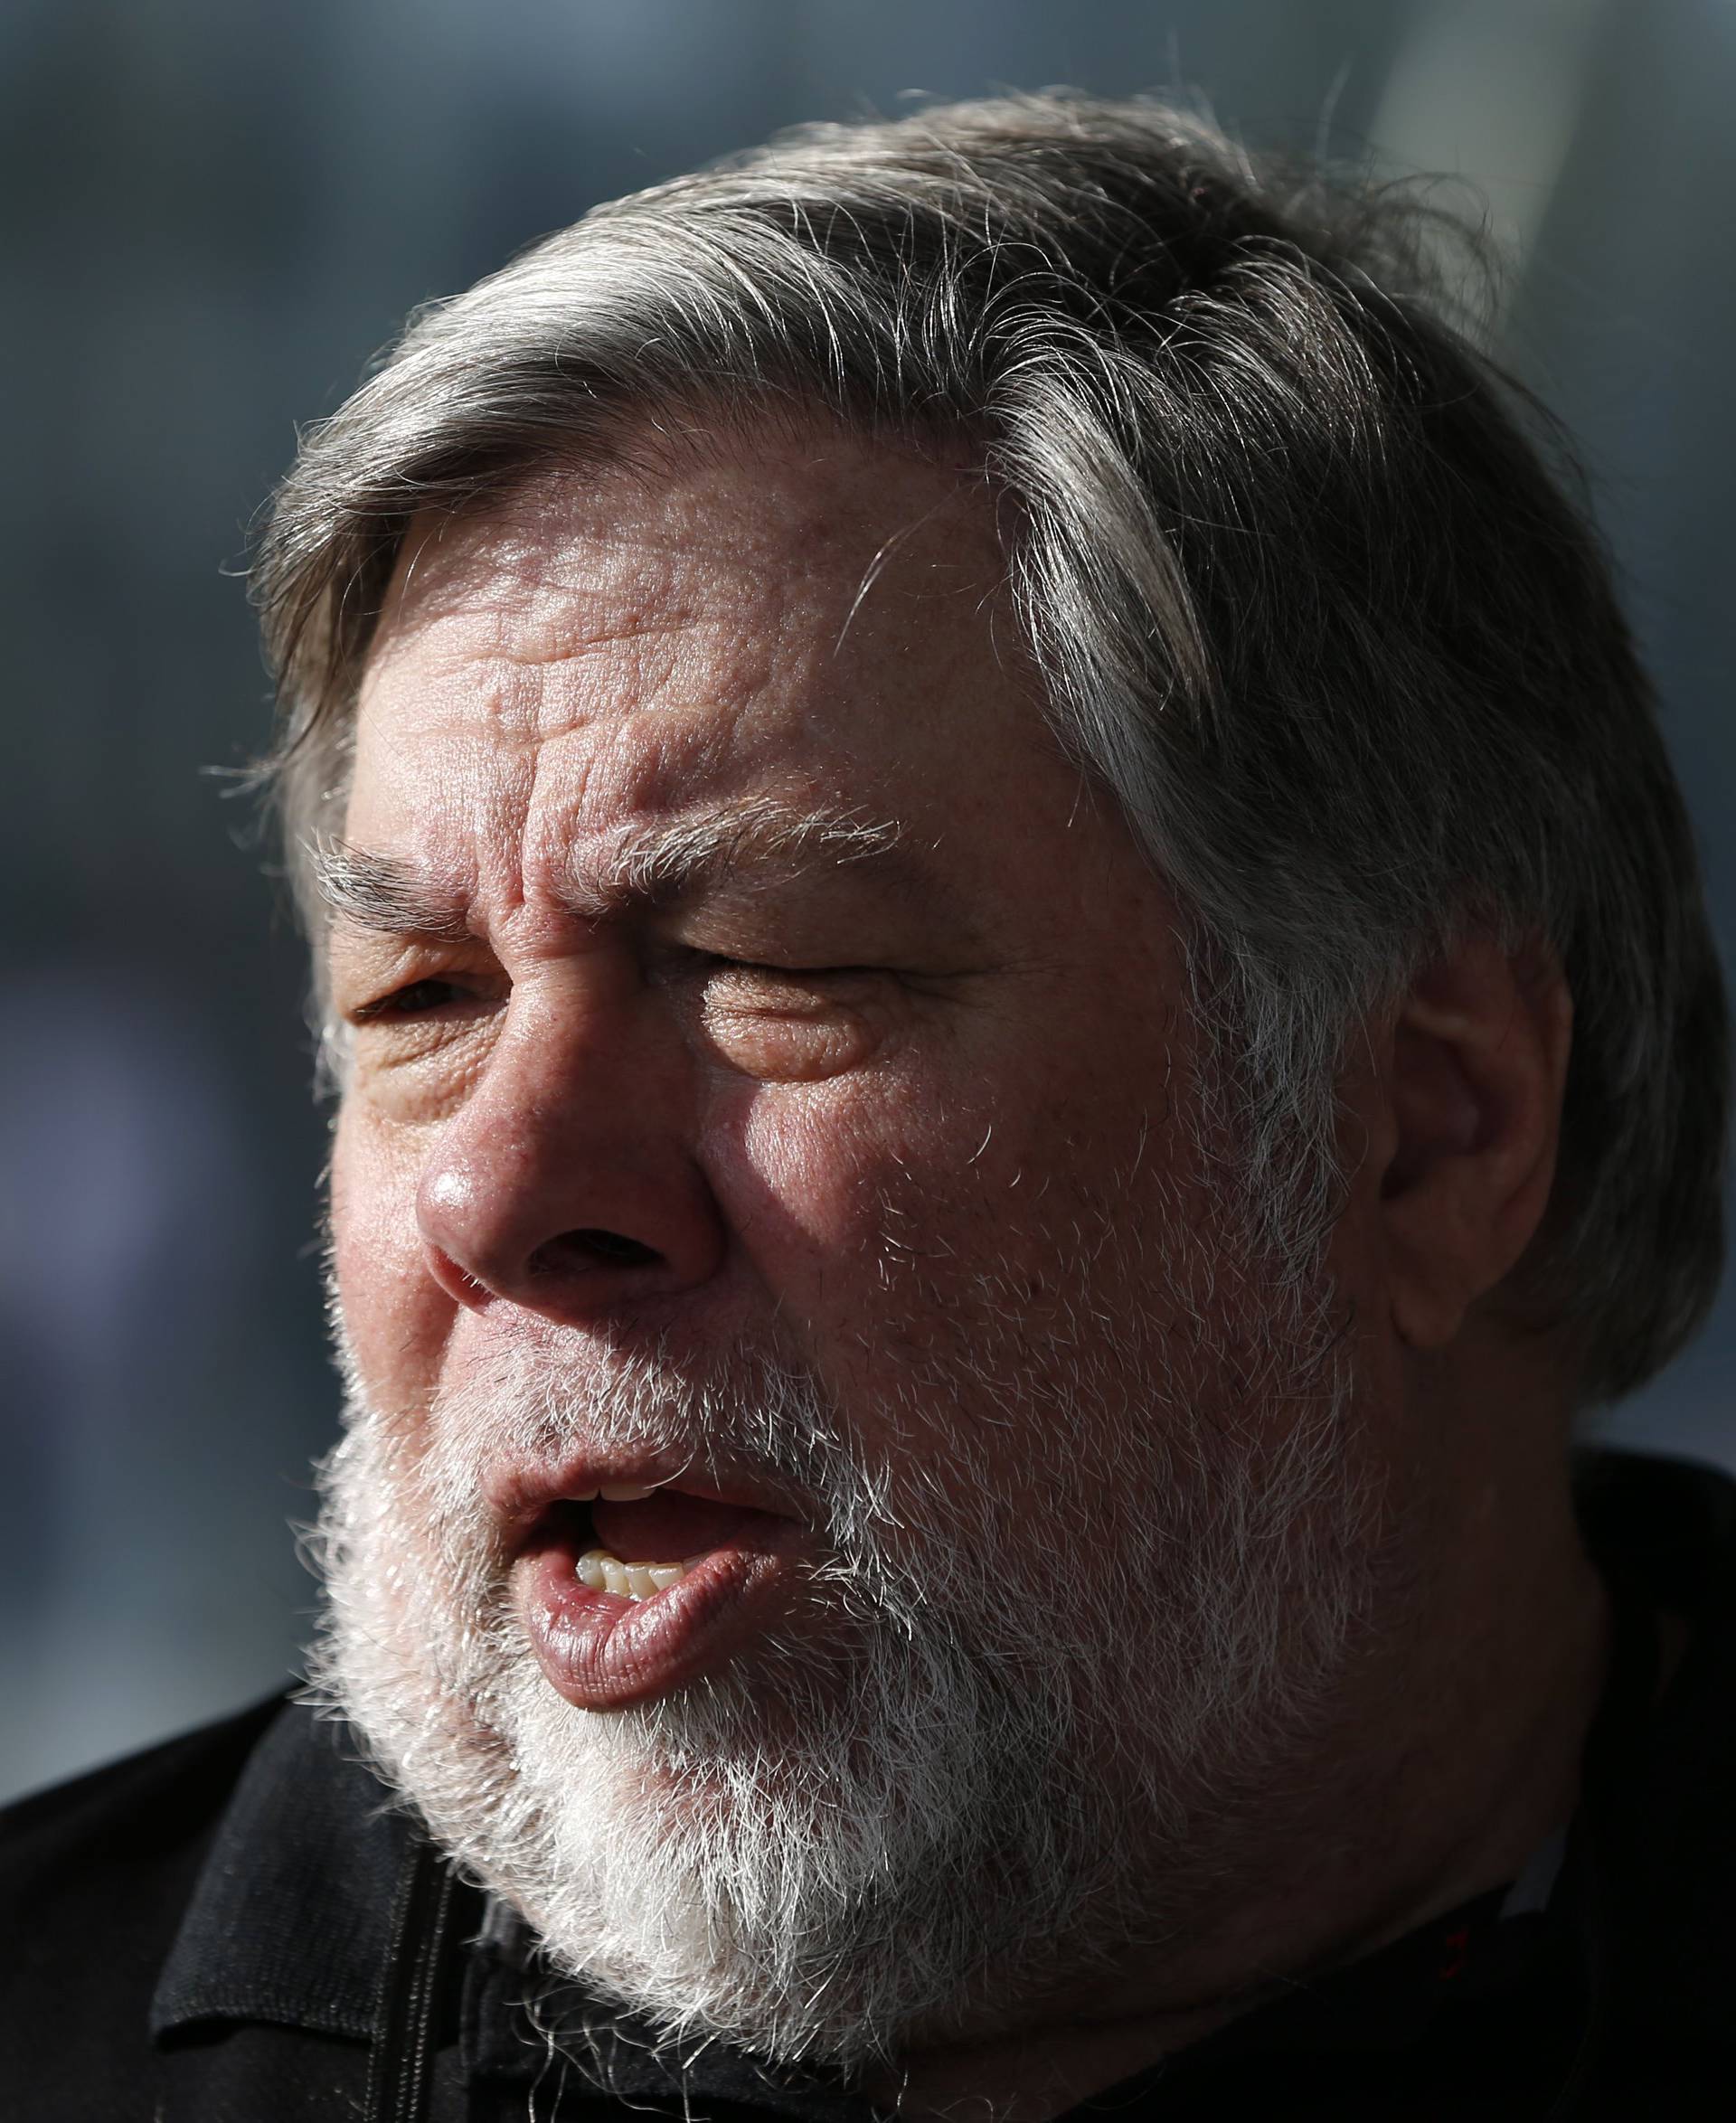 Steve Wozniak, co-founder of Apple, talks to people during a launch event in Cupertino